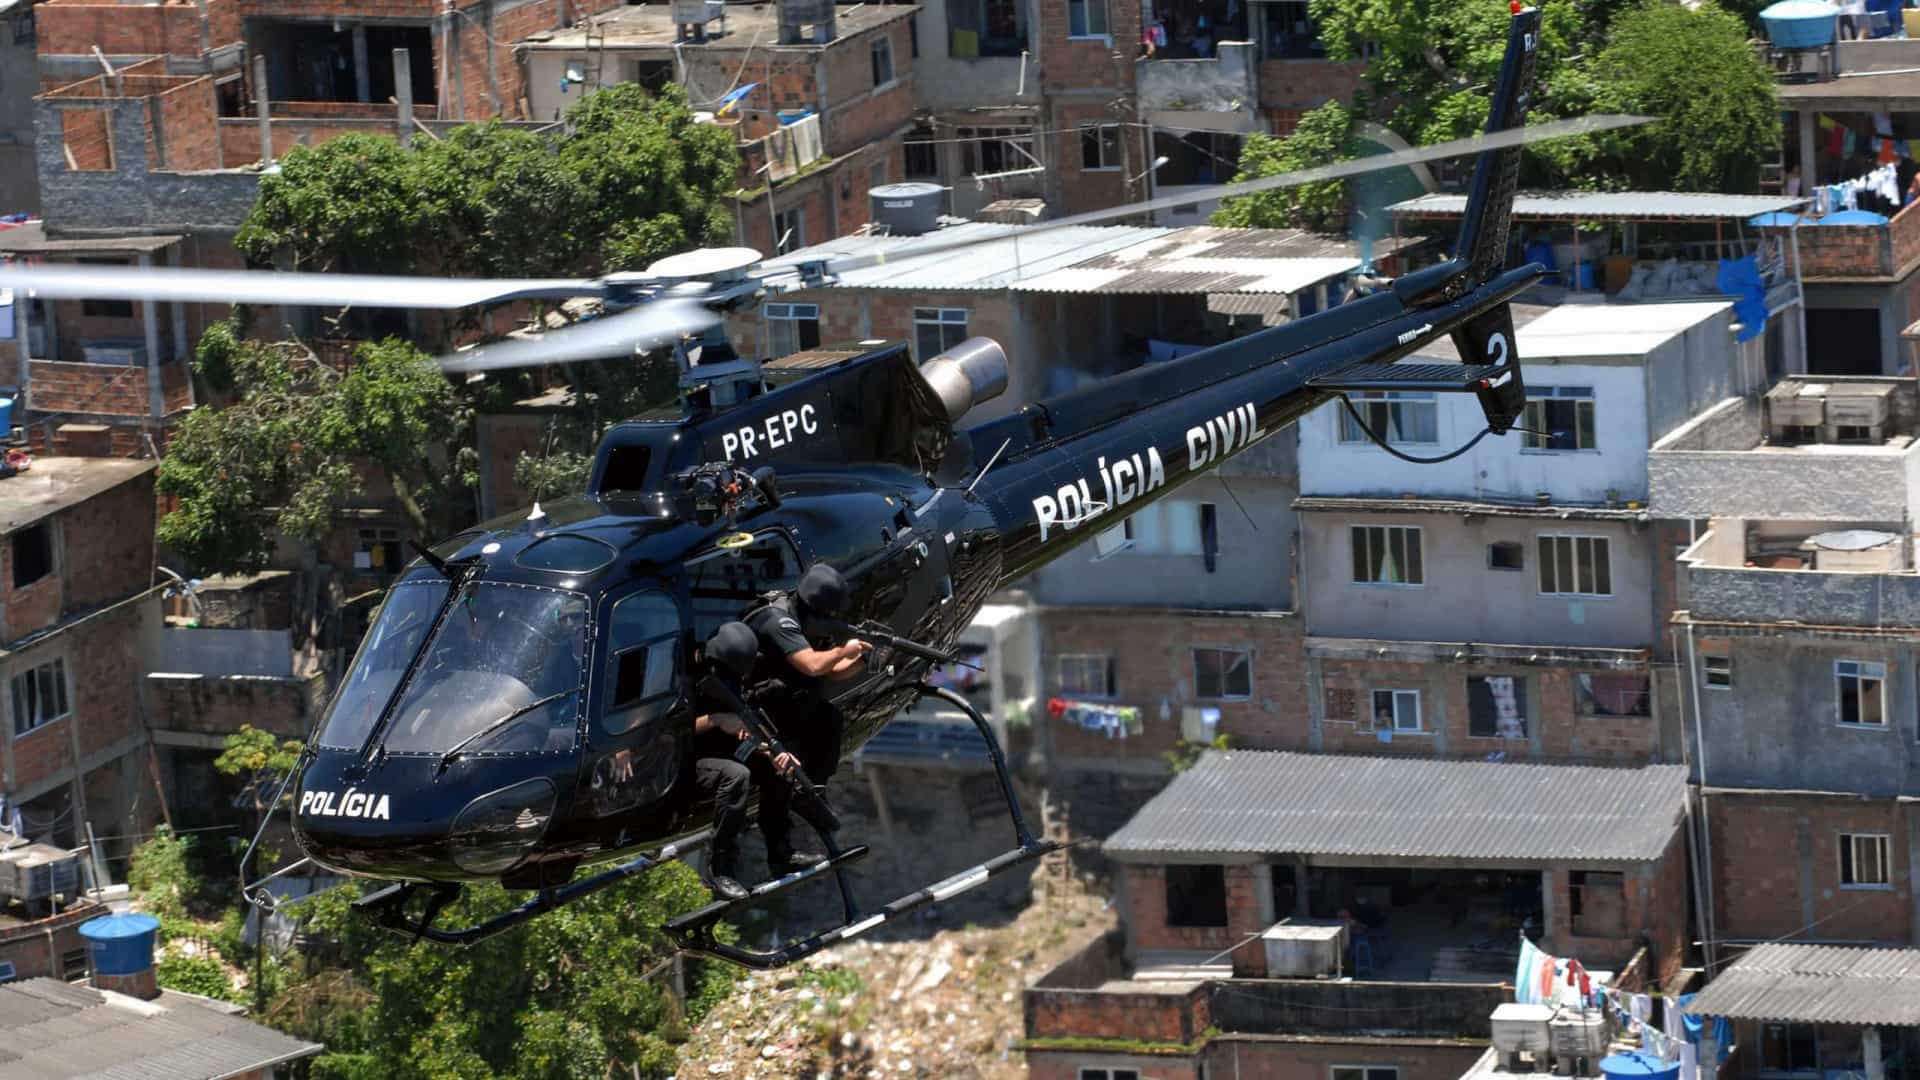 In 2019, the city of Rio de Janeiro recorded a higher number of police operations in areas controlled by drug factions than those dominated by militias in 2019.